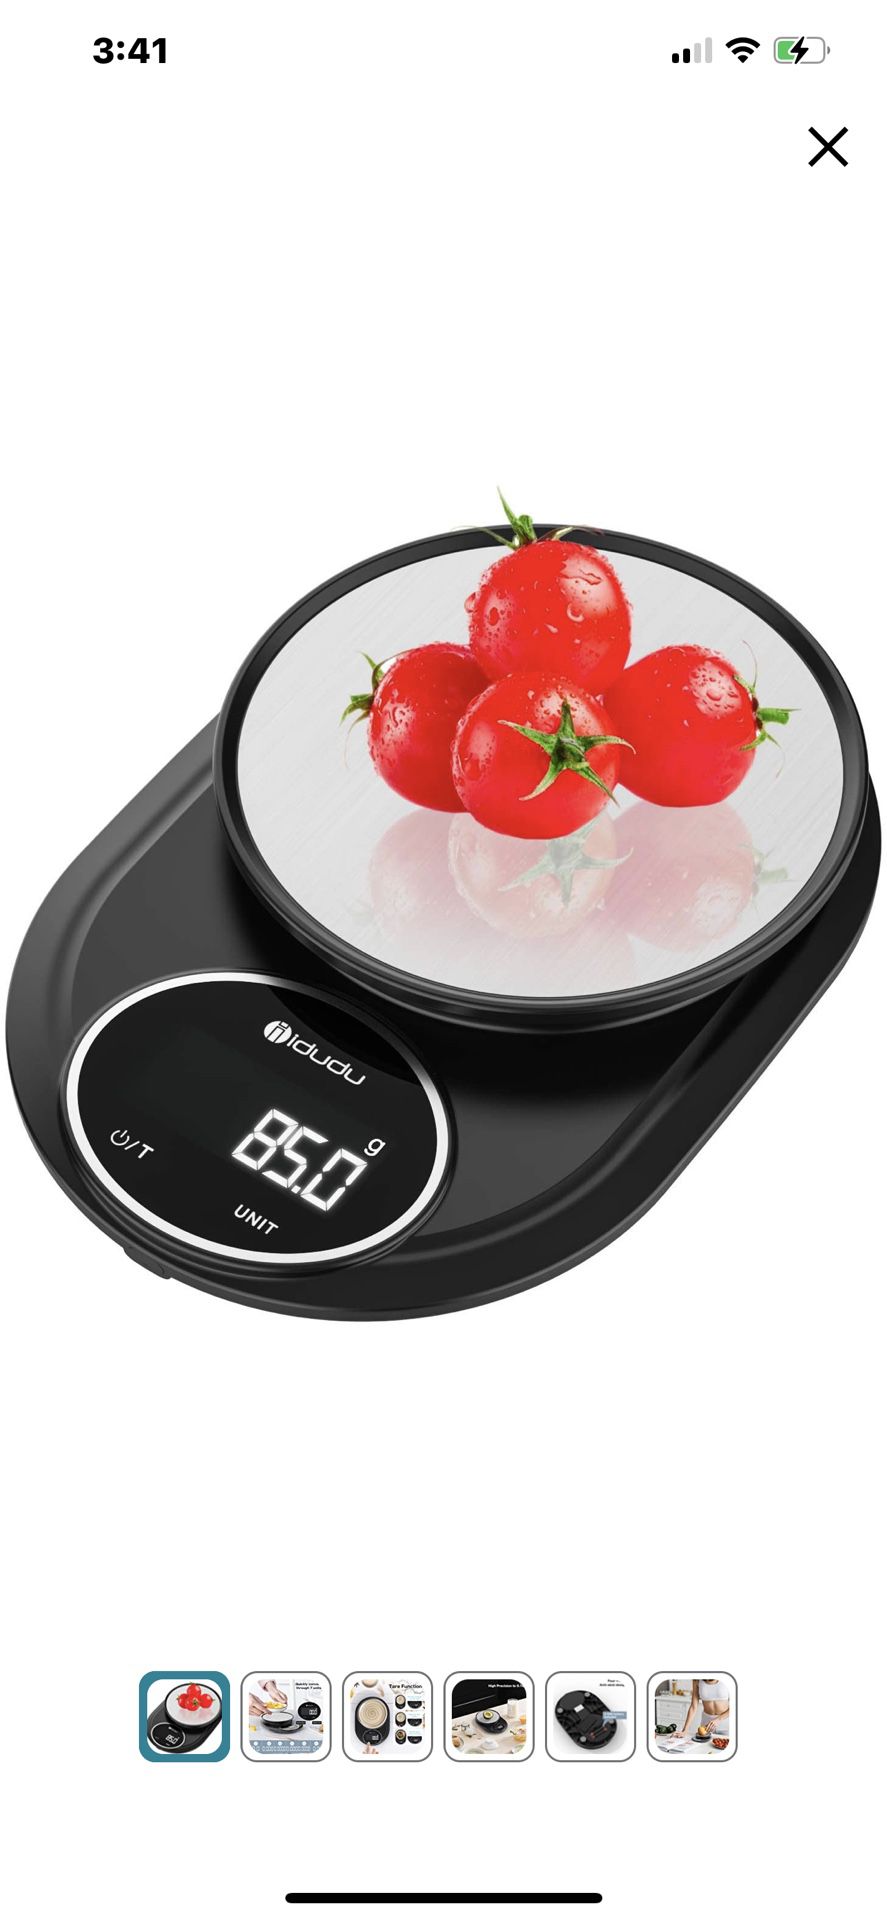 Food Scale, Digital Kitchen Scale Wight Grams and Oz-0.1g/0.001oz for Baking, Cooking and Coffee with LCD Display